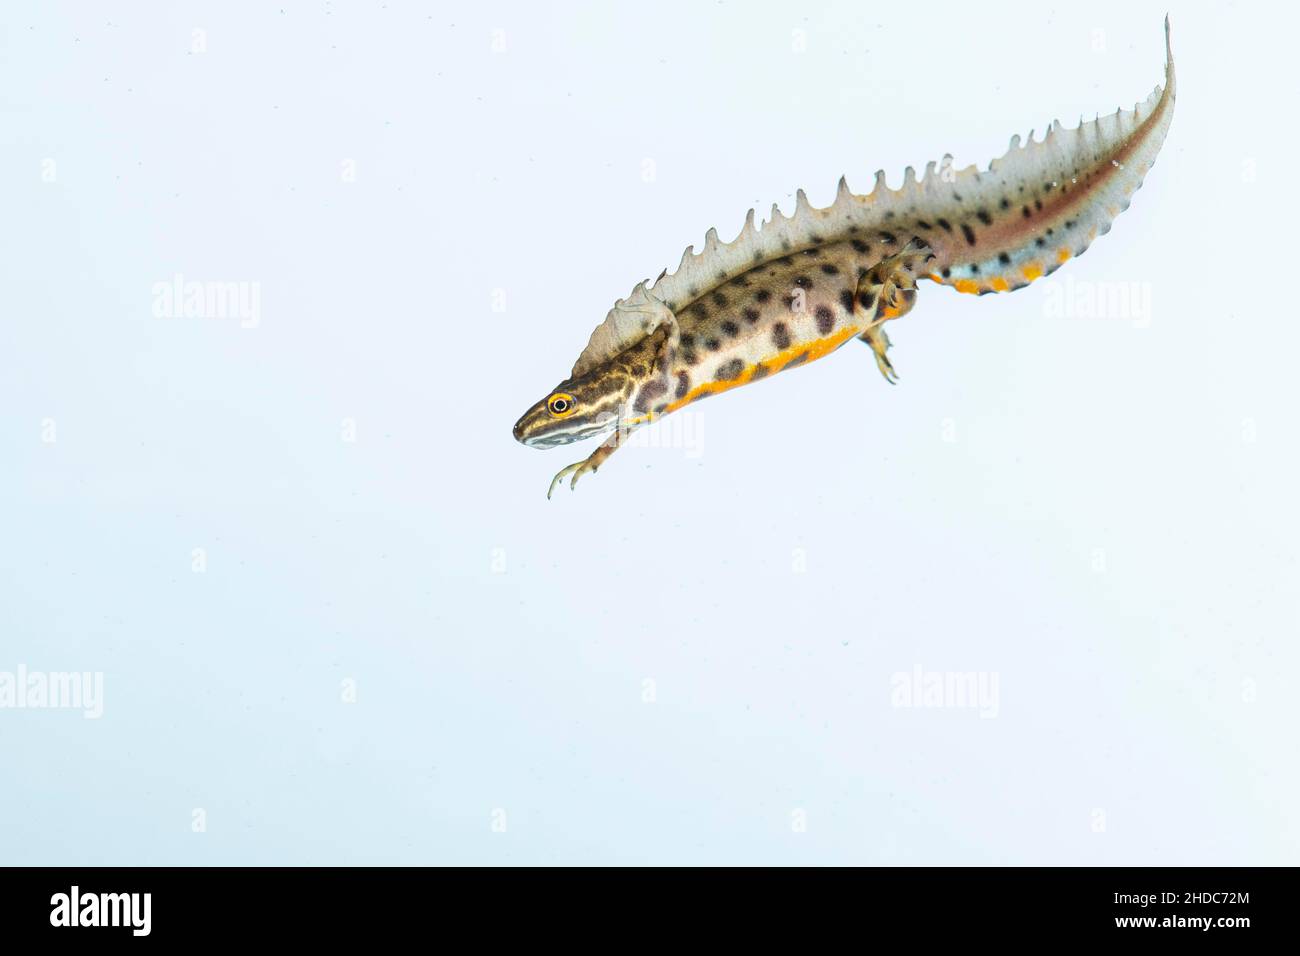 Northern crested newt (Triturus cristatus), cut out, swimming, Oldenburger Münsterland, Vechta, Lower Saxony, Germany, Europe Stock Photo